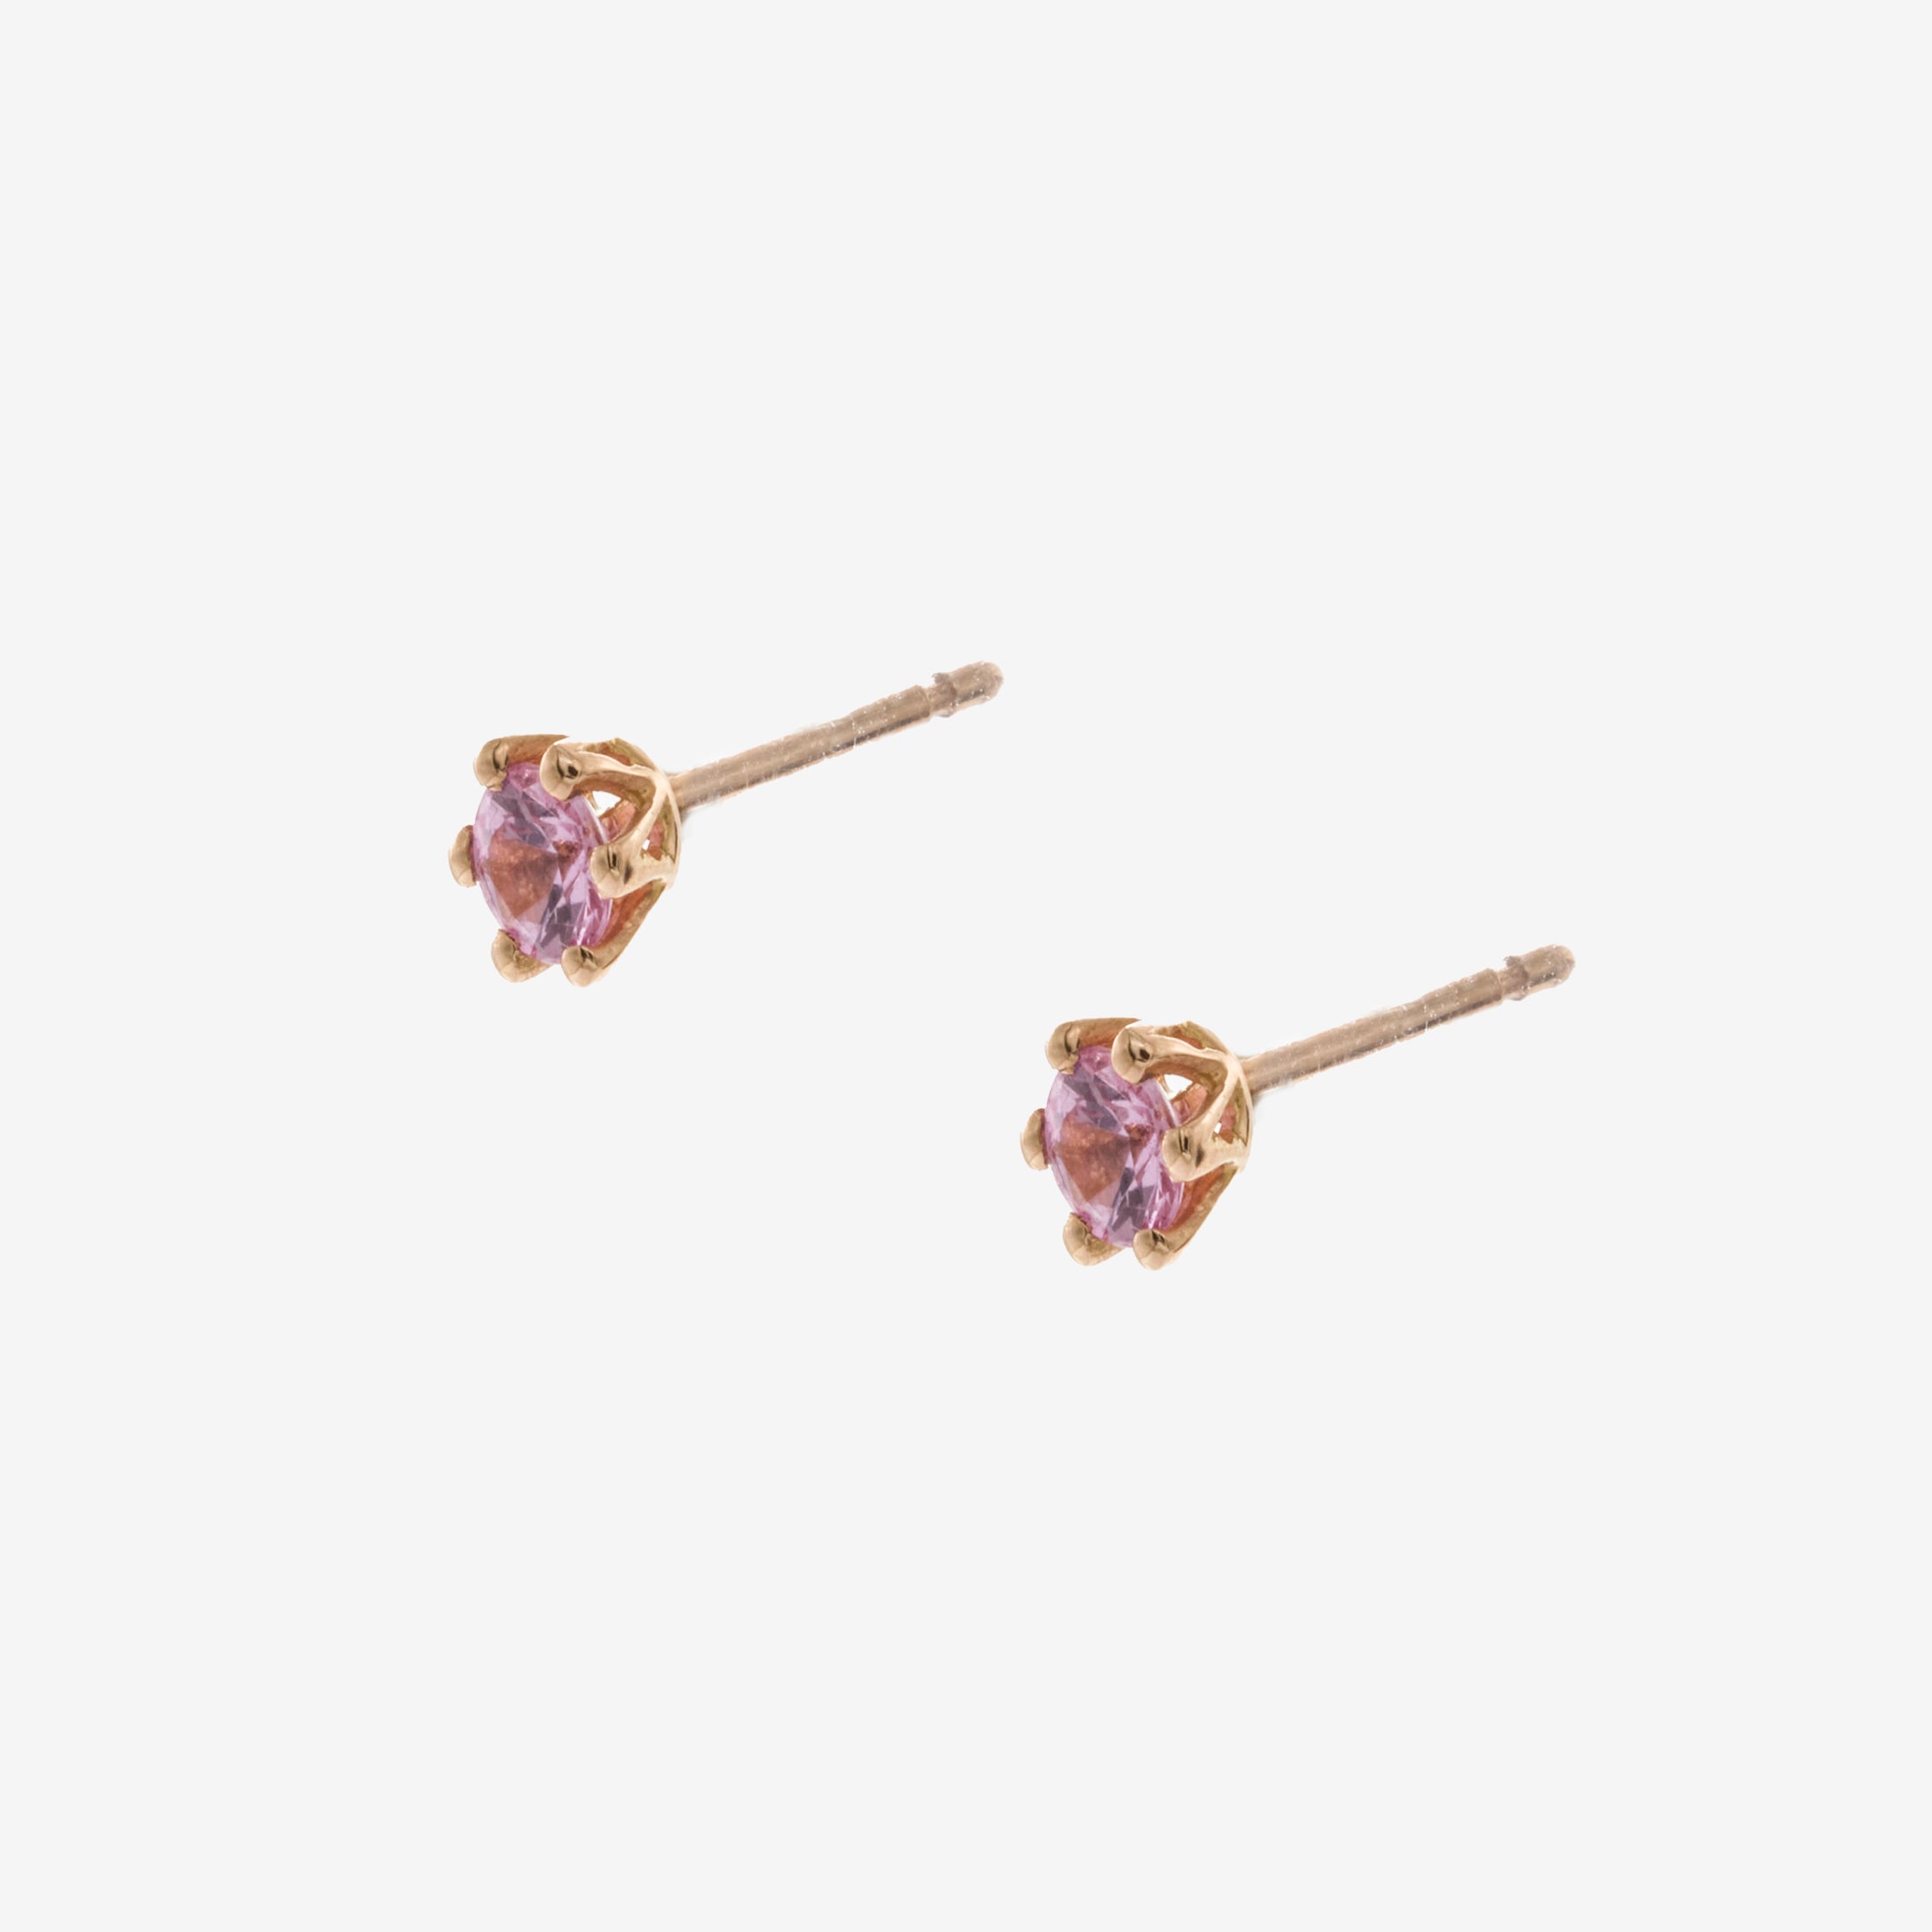 Idris earrings with pink sapphires